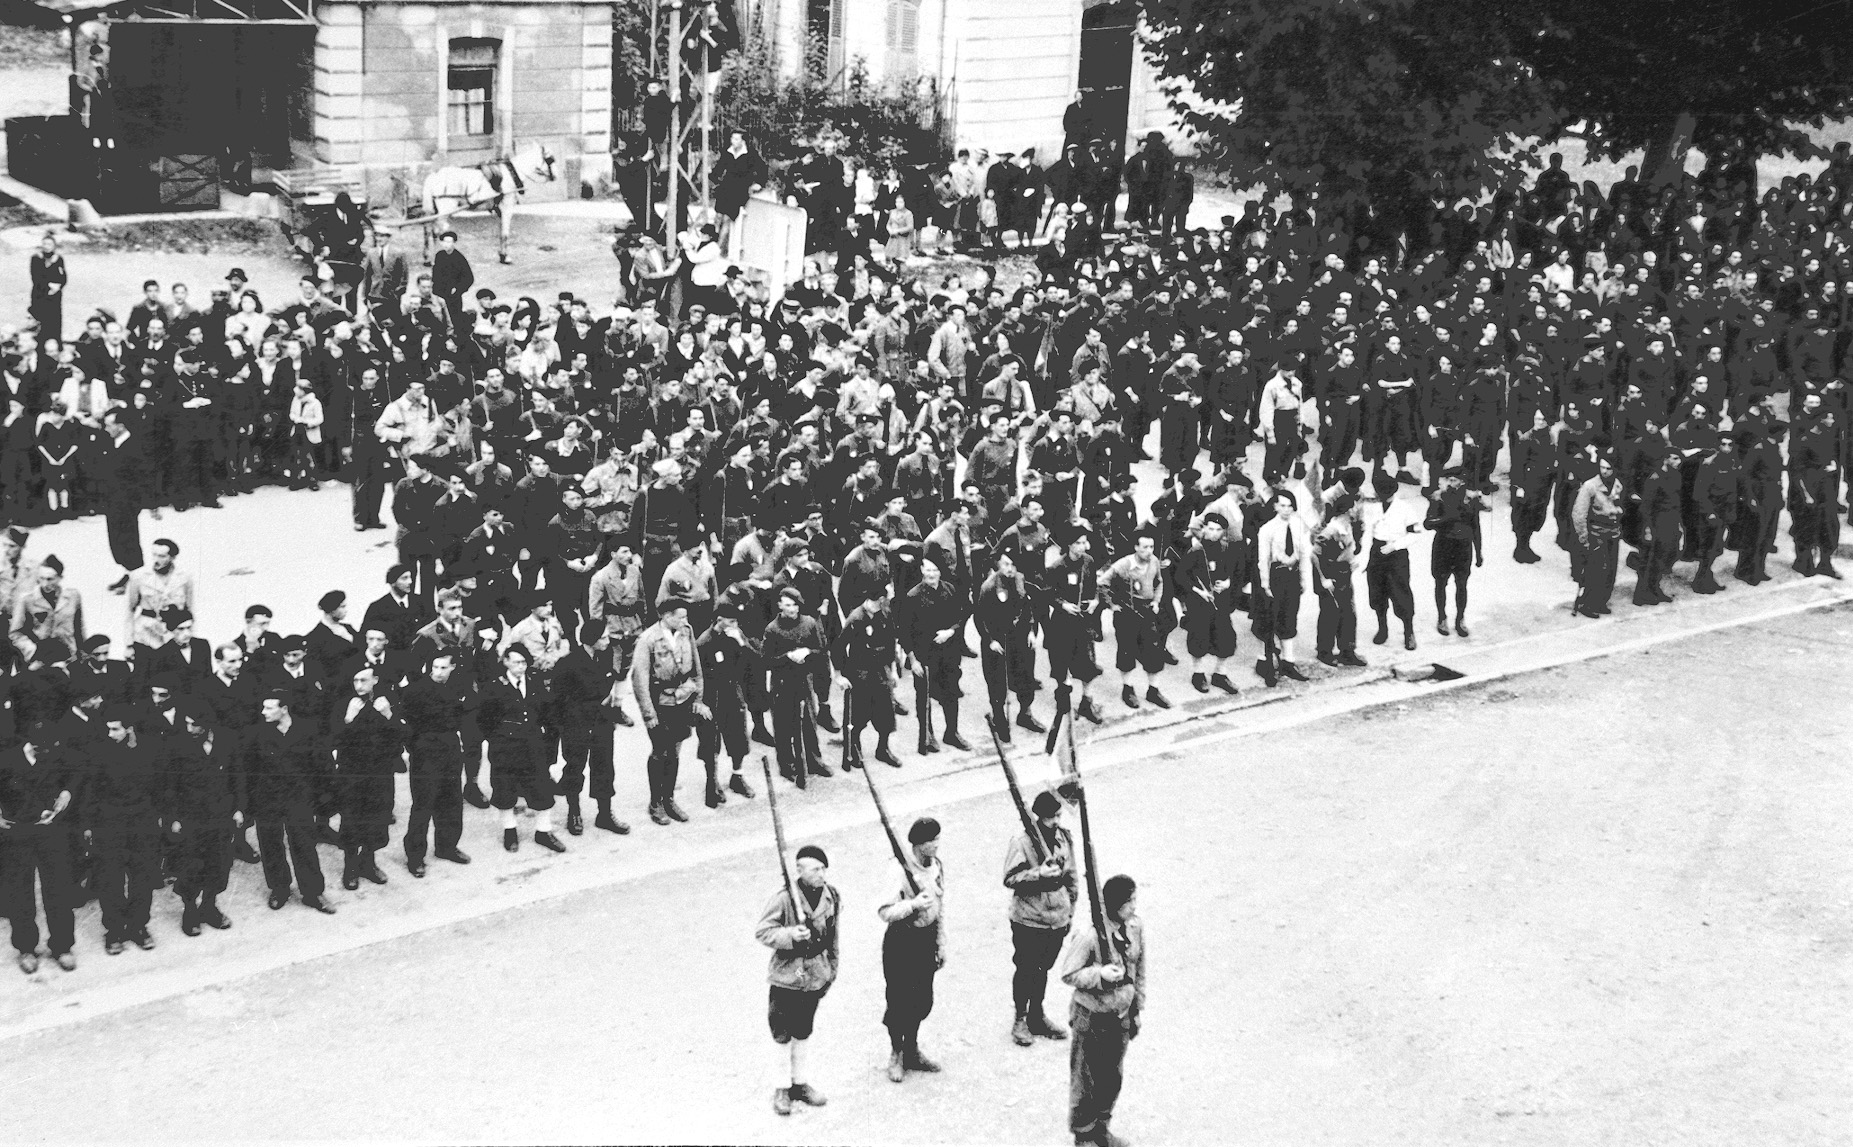 Victory won, an honor guard of Resistance members stands at attention while crowds line the streets of Albertville.